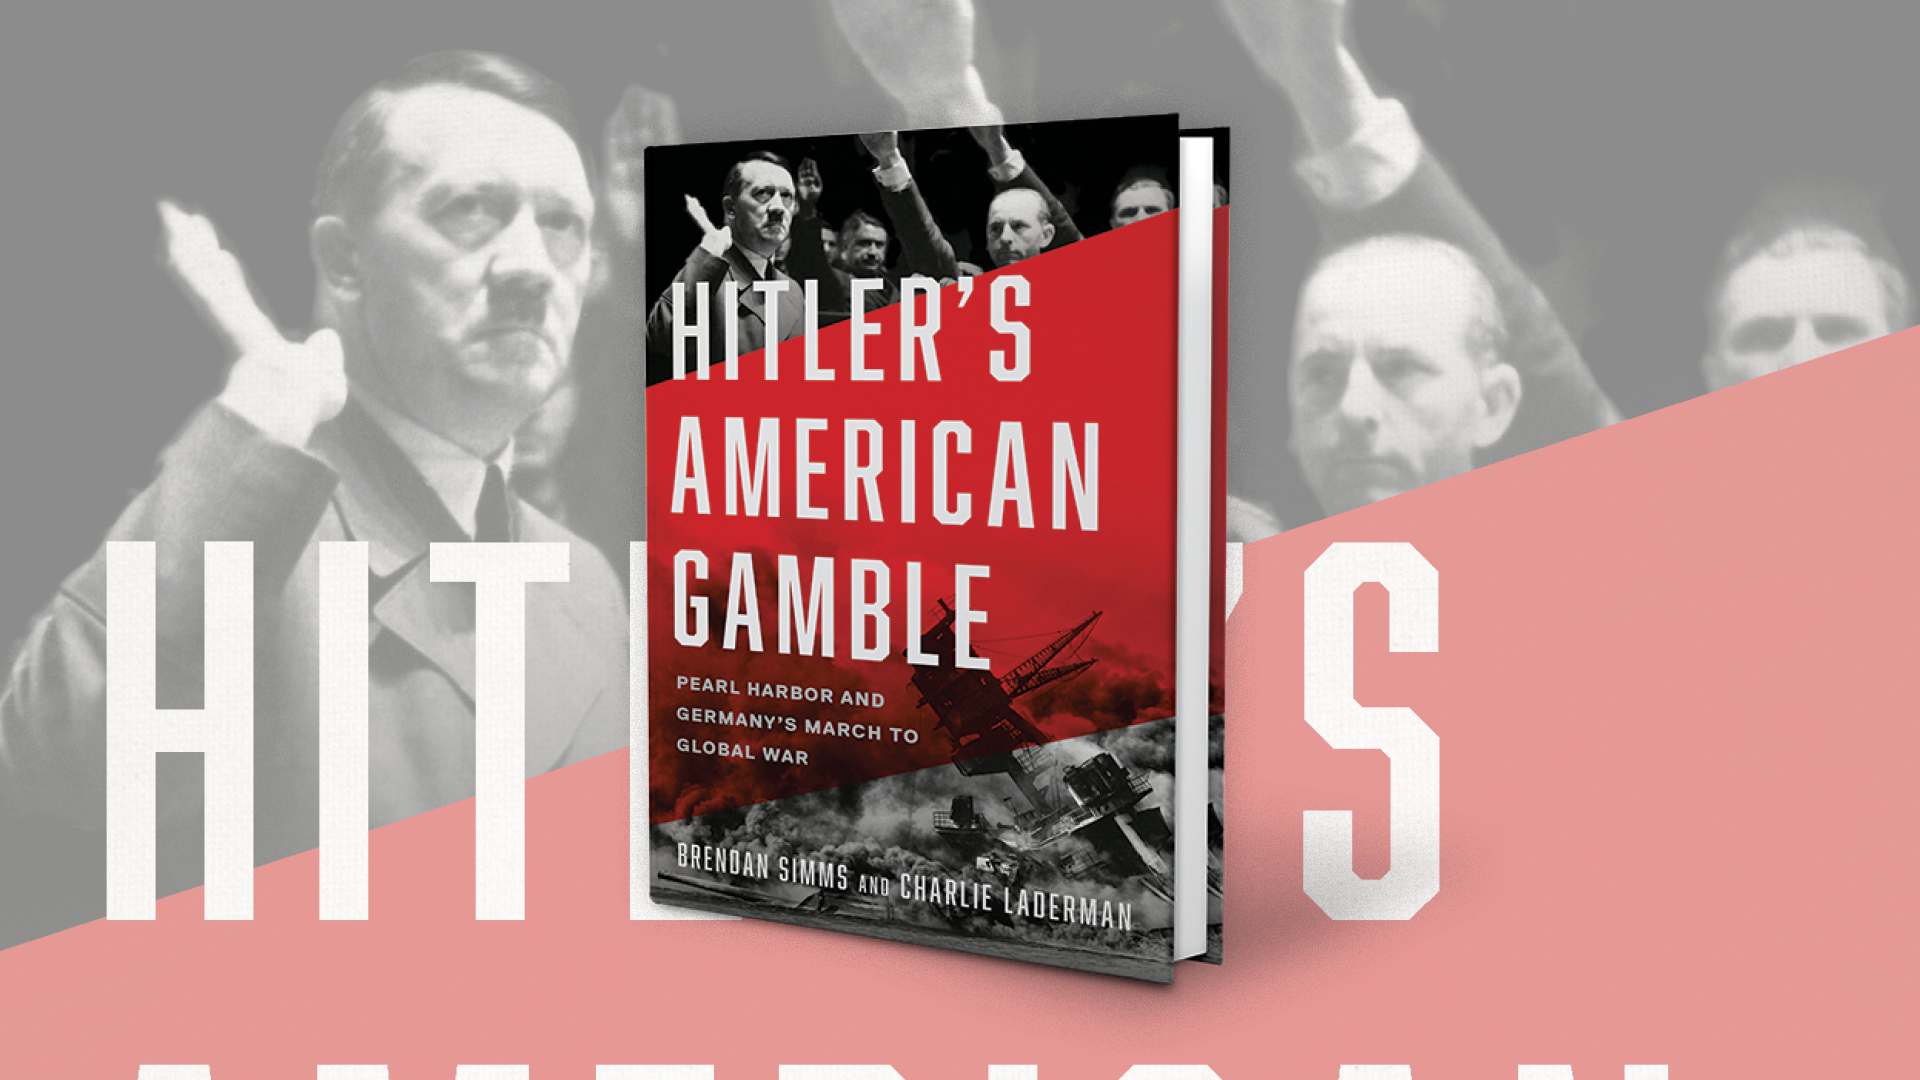 Hitler’s American Gamble: Pearl Harbor and Germany’s March to Global War